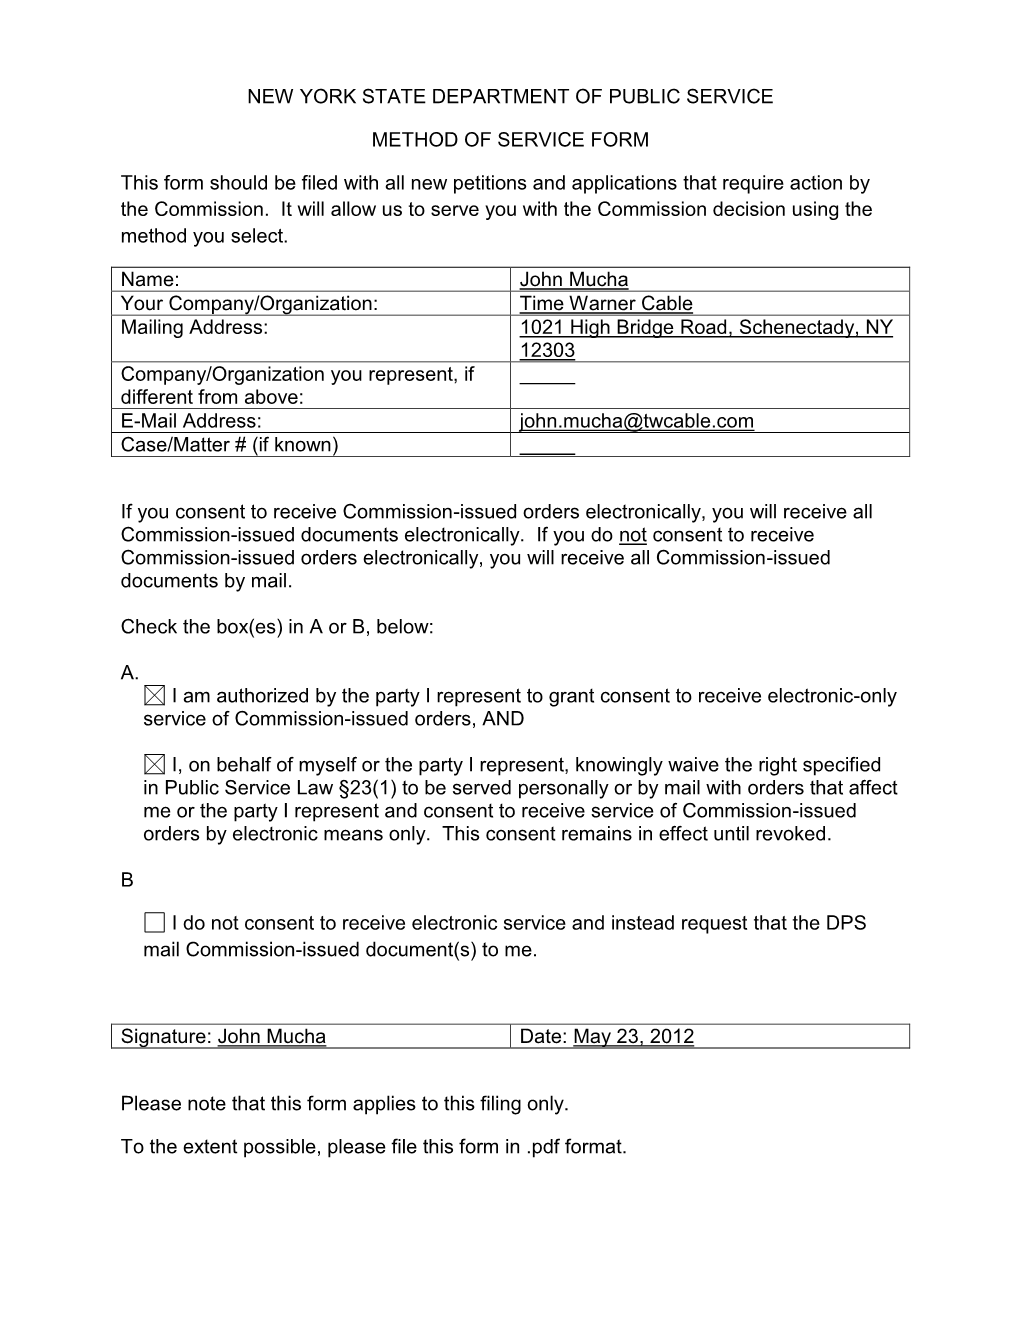 NEW YORK STATE DEPARTMENT of PUBLIC SERVICE METHOD of SERVICE FORM This Form Should Be Filed with All New Petitions and Applicat